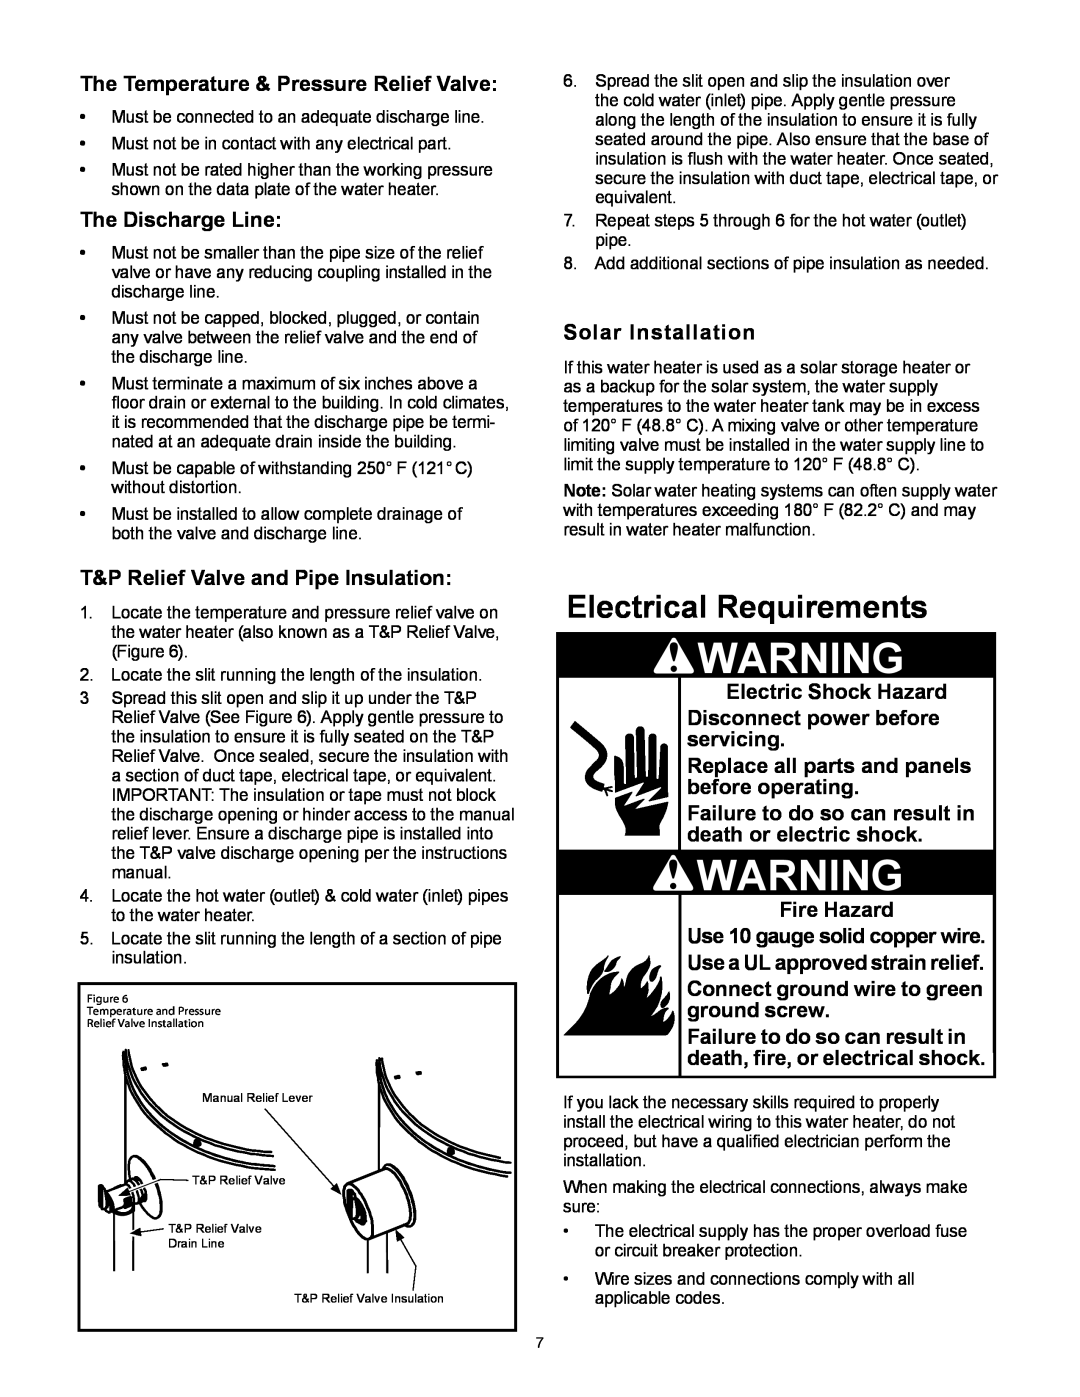 Whirlpool 318686-000 installation instructions Electrical Requirements 